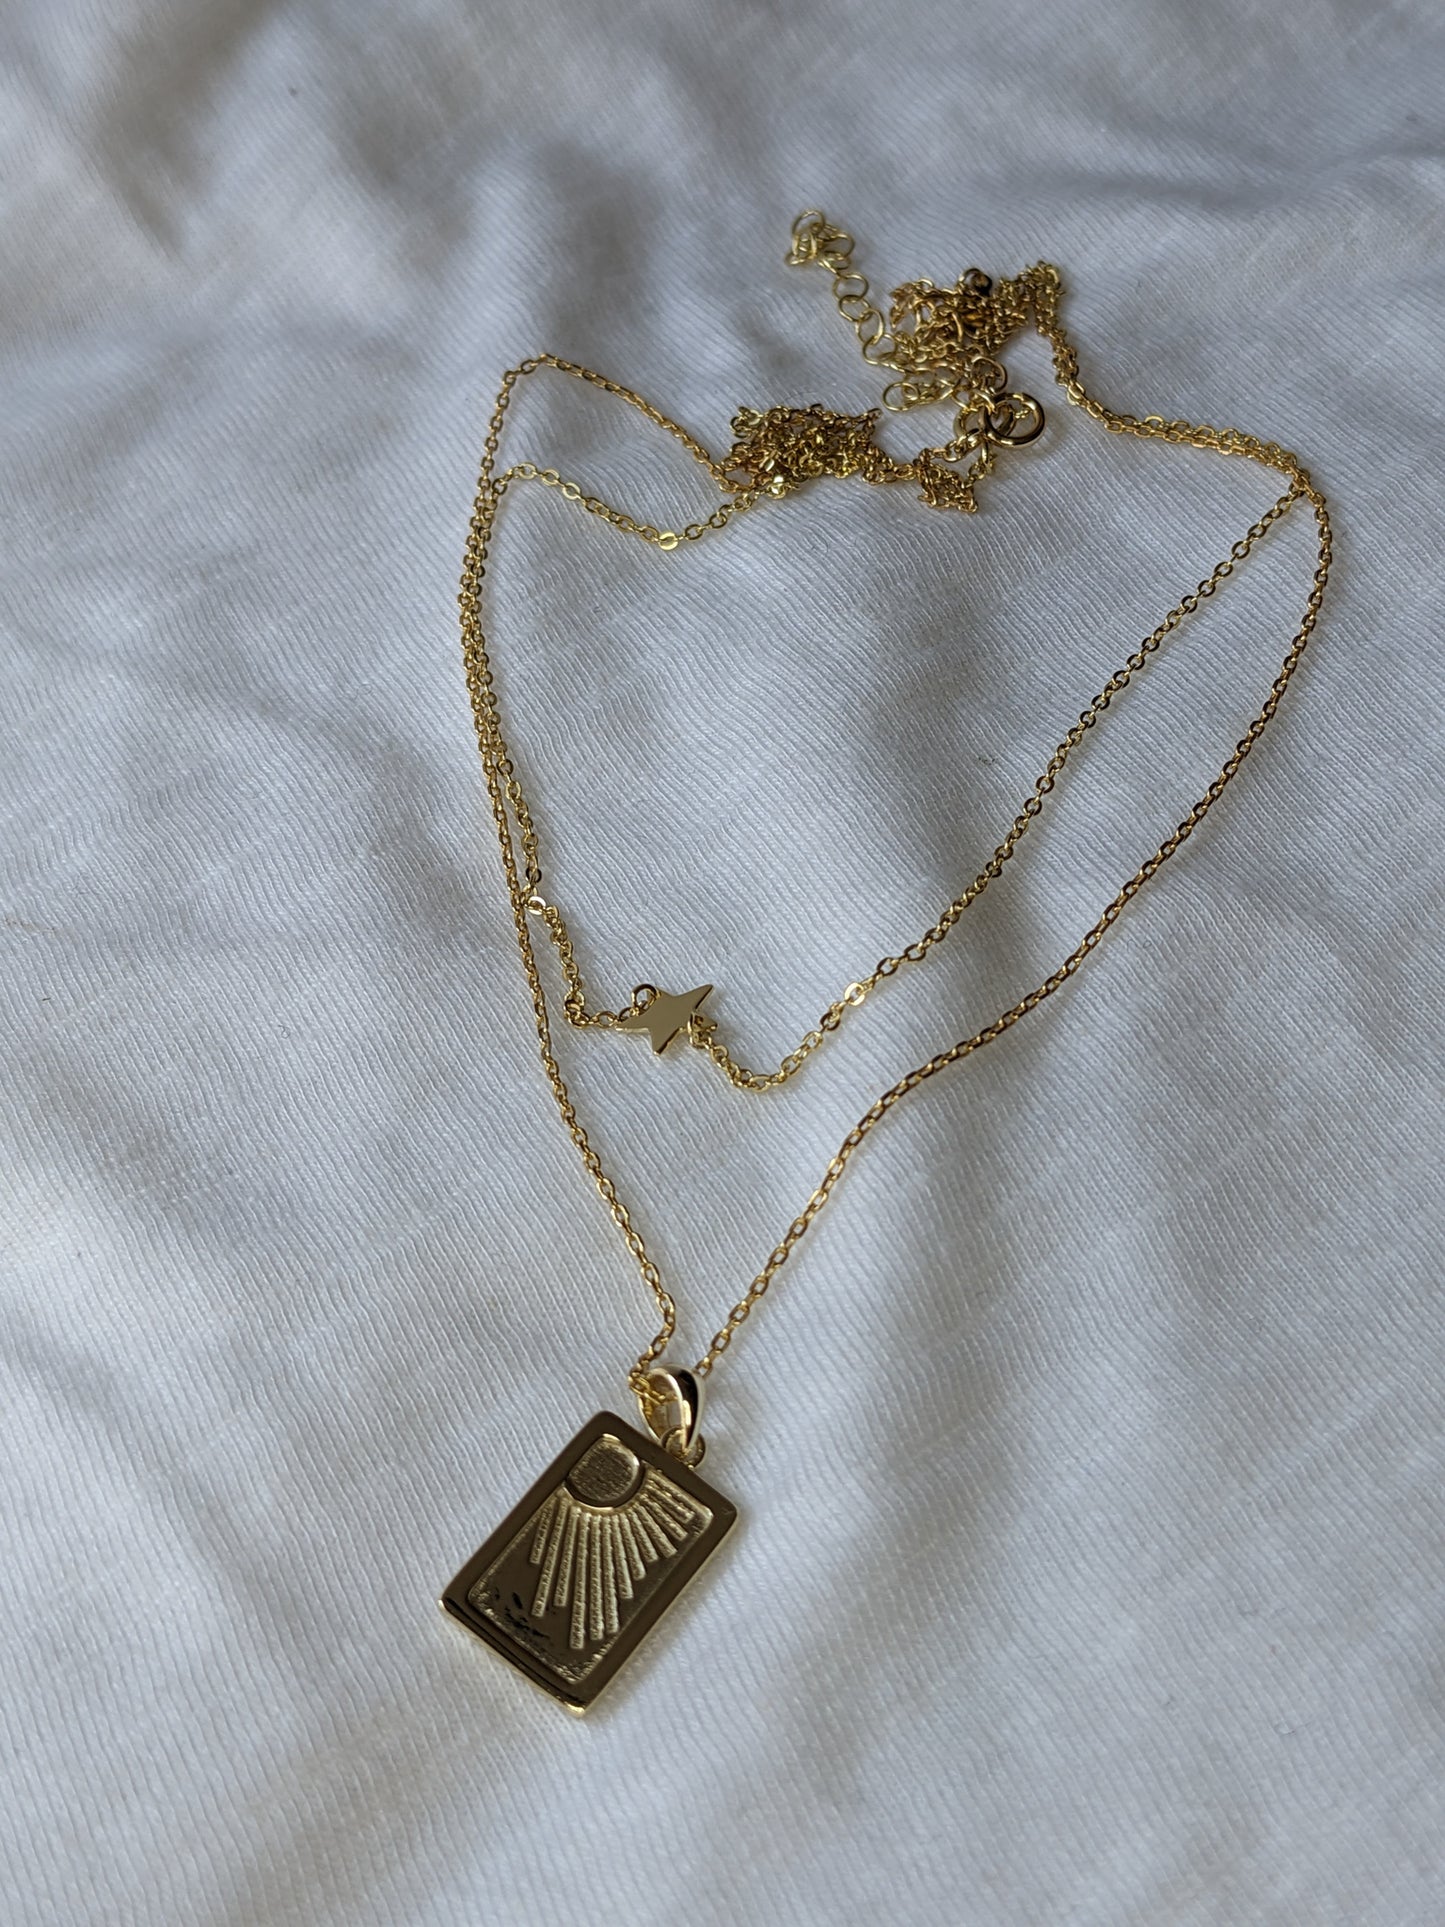 A Little Ray of Sunlight - Gold Plated Necklace